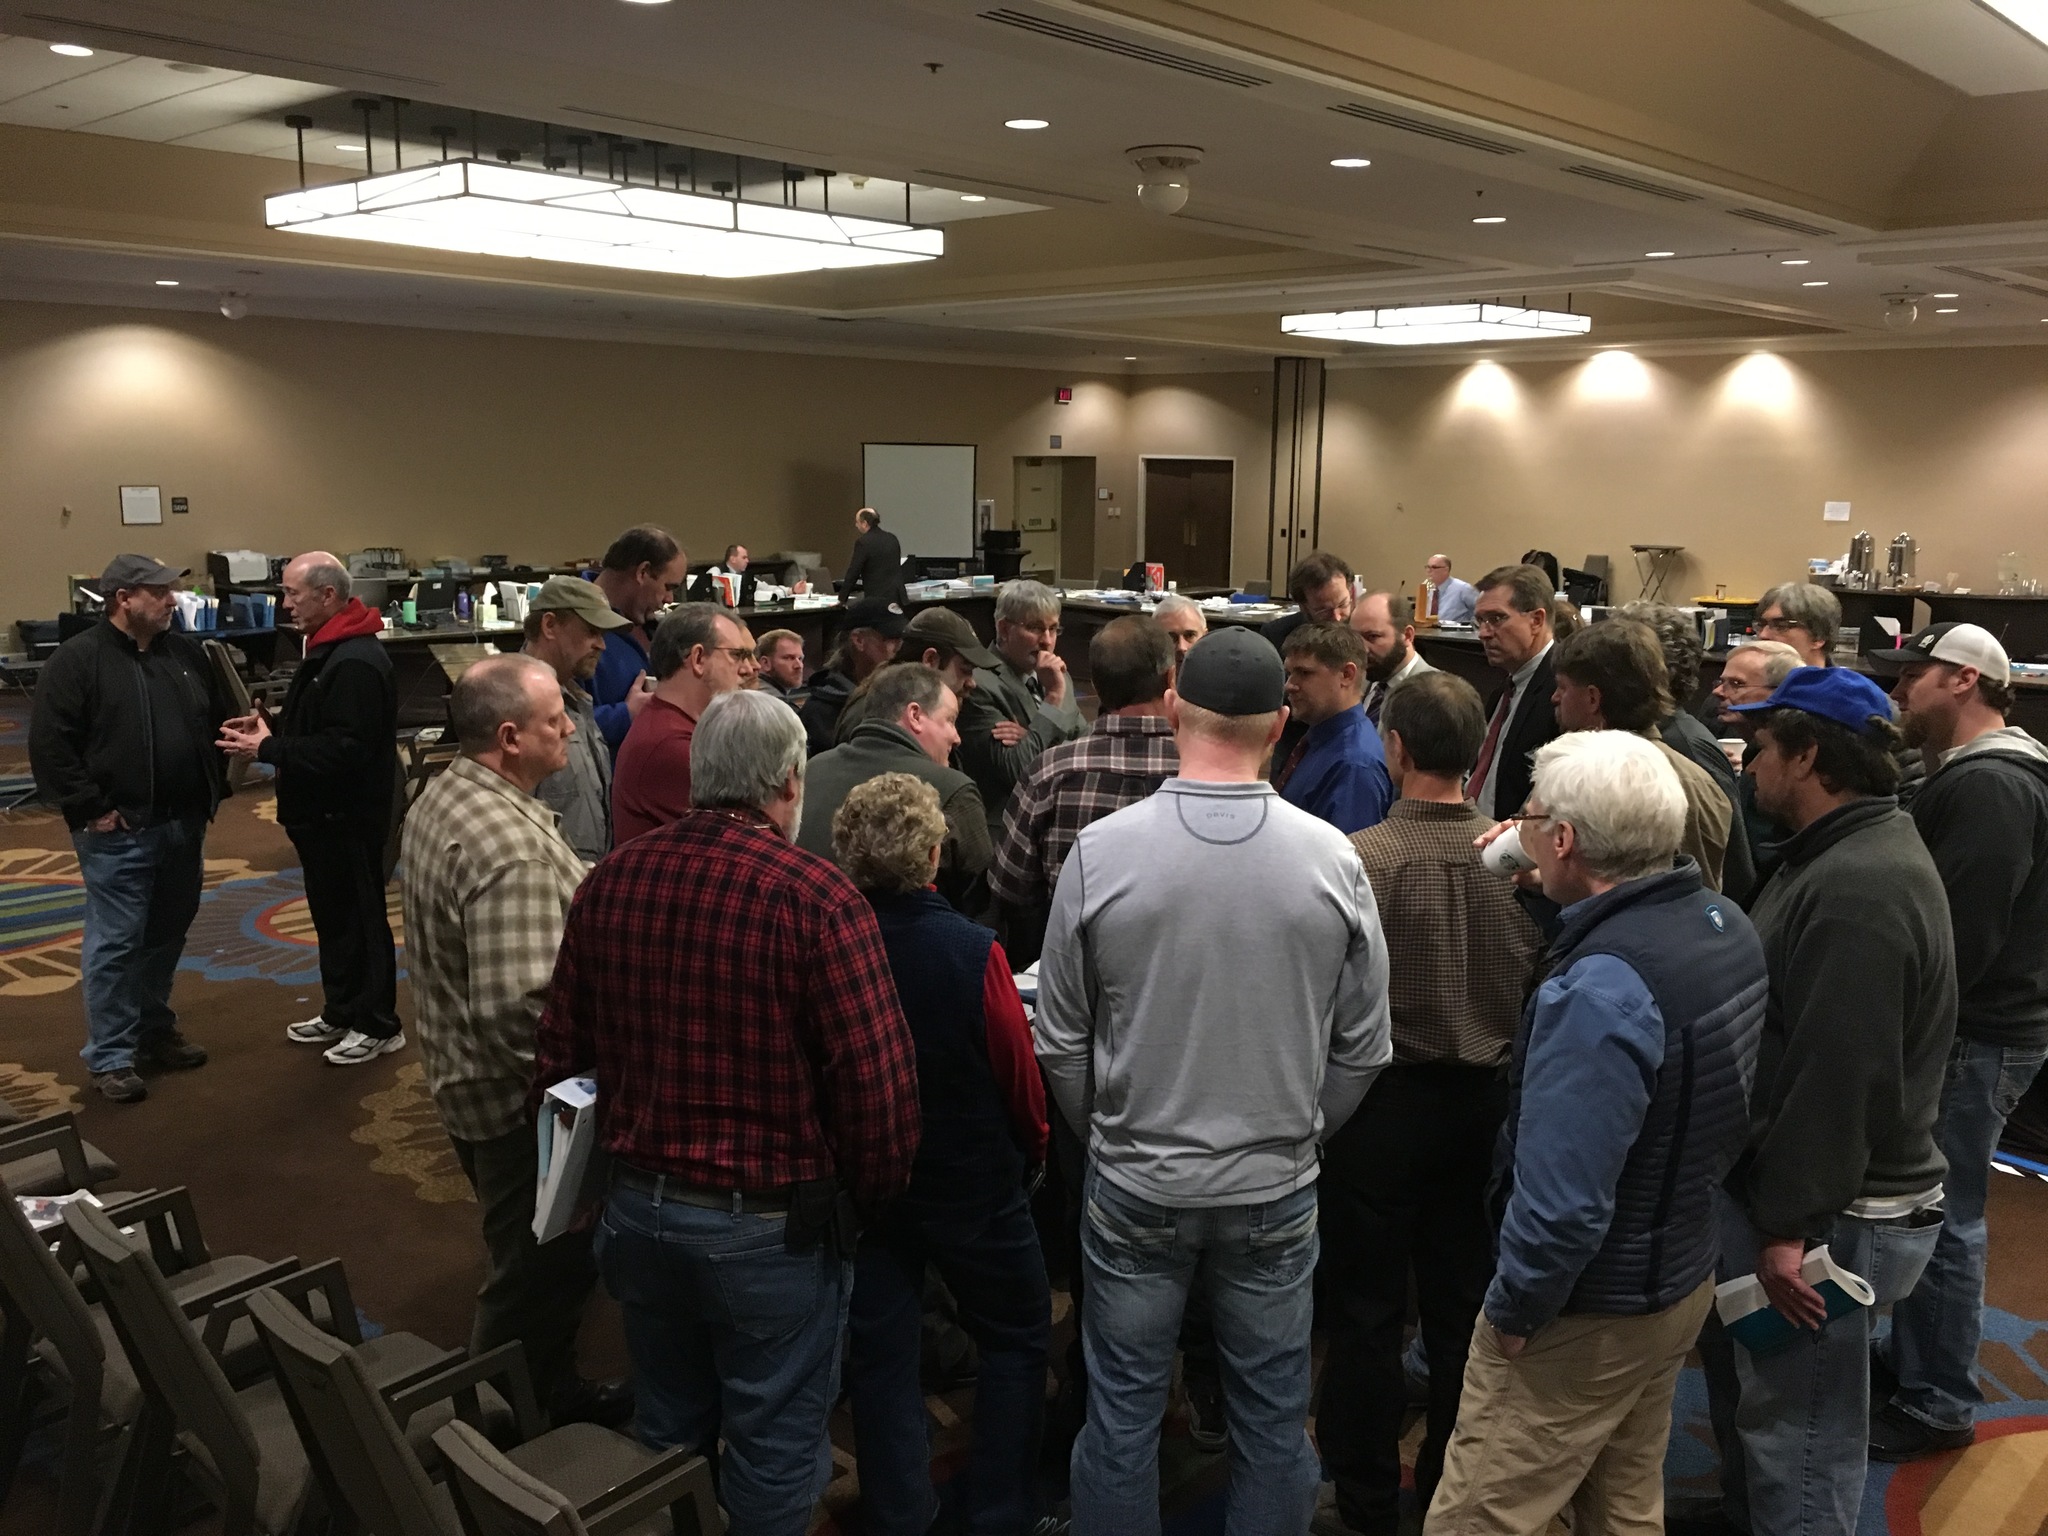 Attendees of various user groups crowd near the front of the room during a break at the Board of Fisheries’ Upper Cook Inlet meeting Tuesday, Feb. 28, 2017 in Anchorage, Alaska. (DJ Summers/Alaska Journal of Commerce)